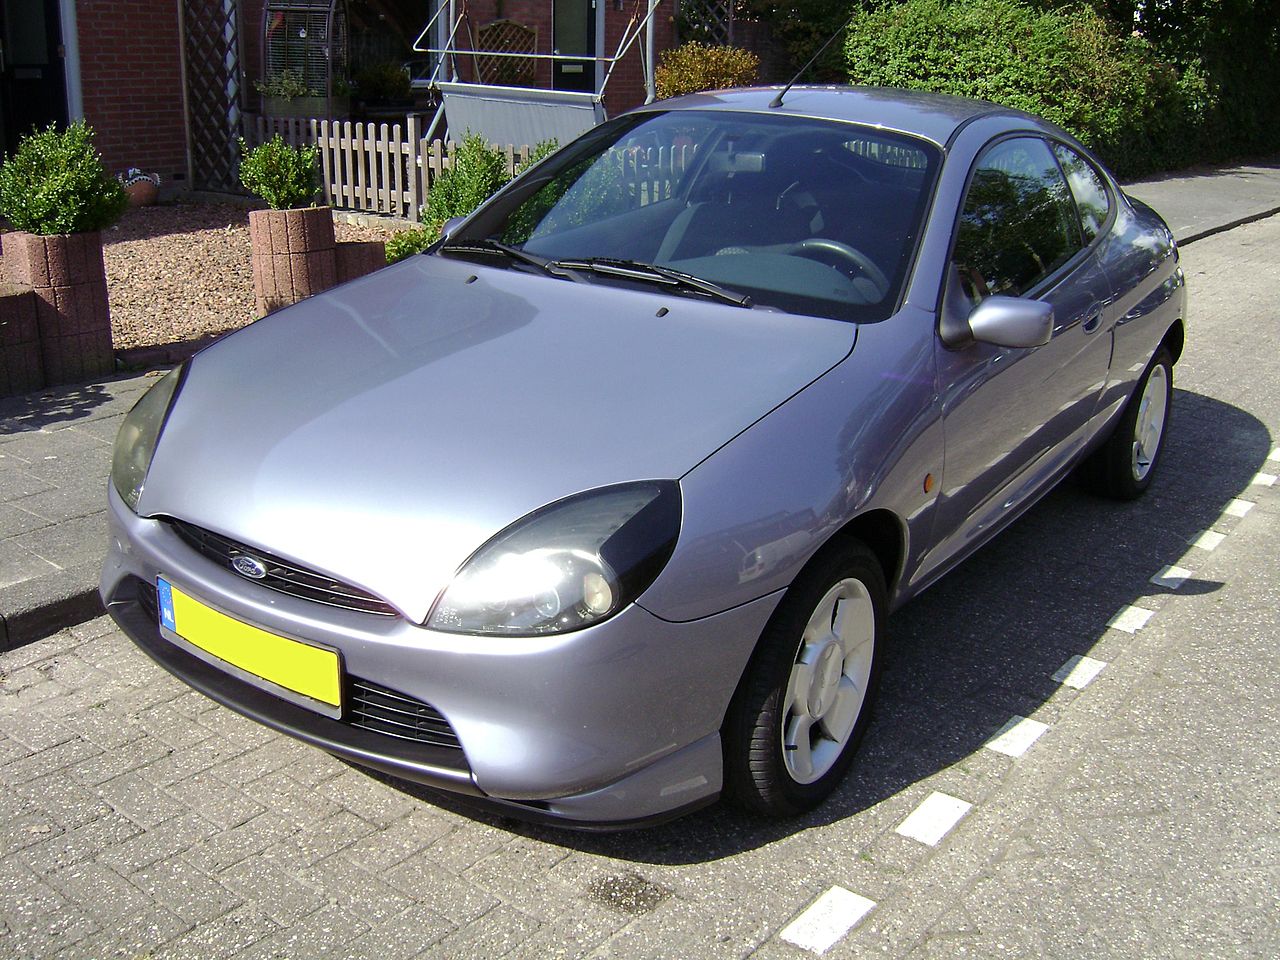 File:Ford puma voor.JPG - Wikimedia Commons